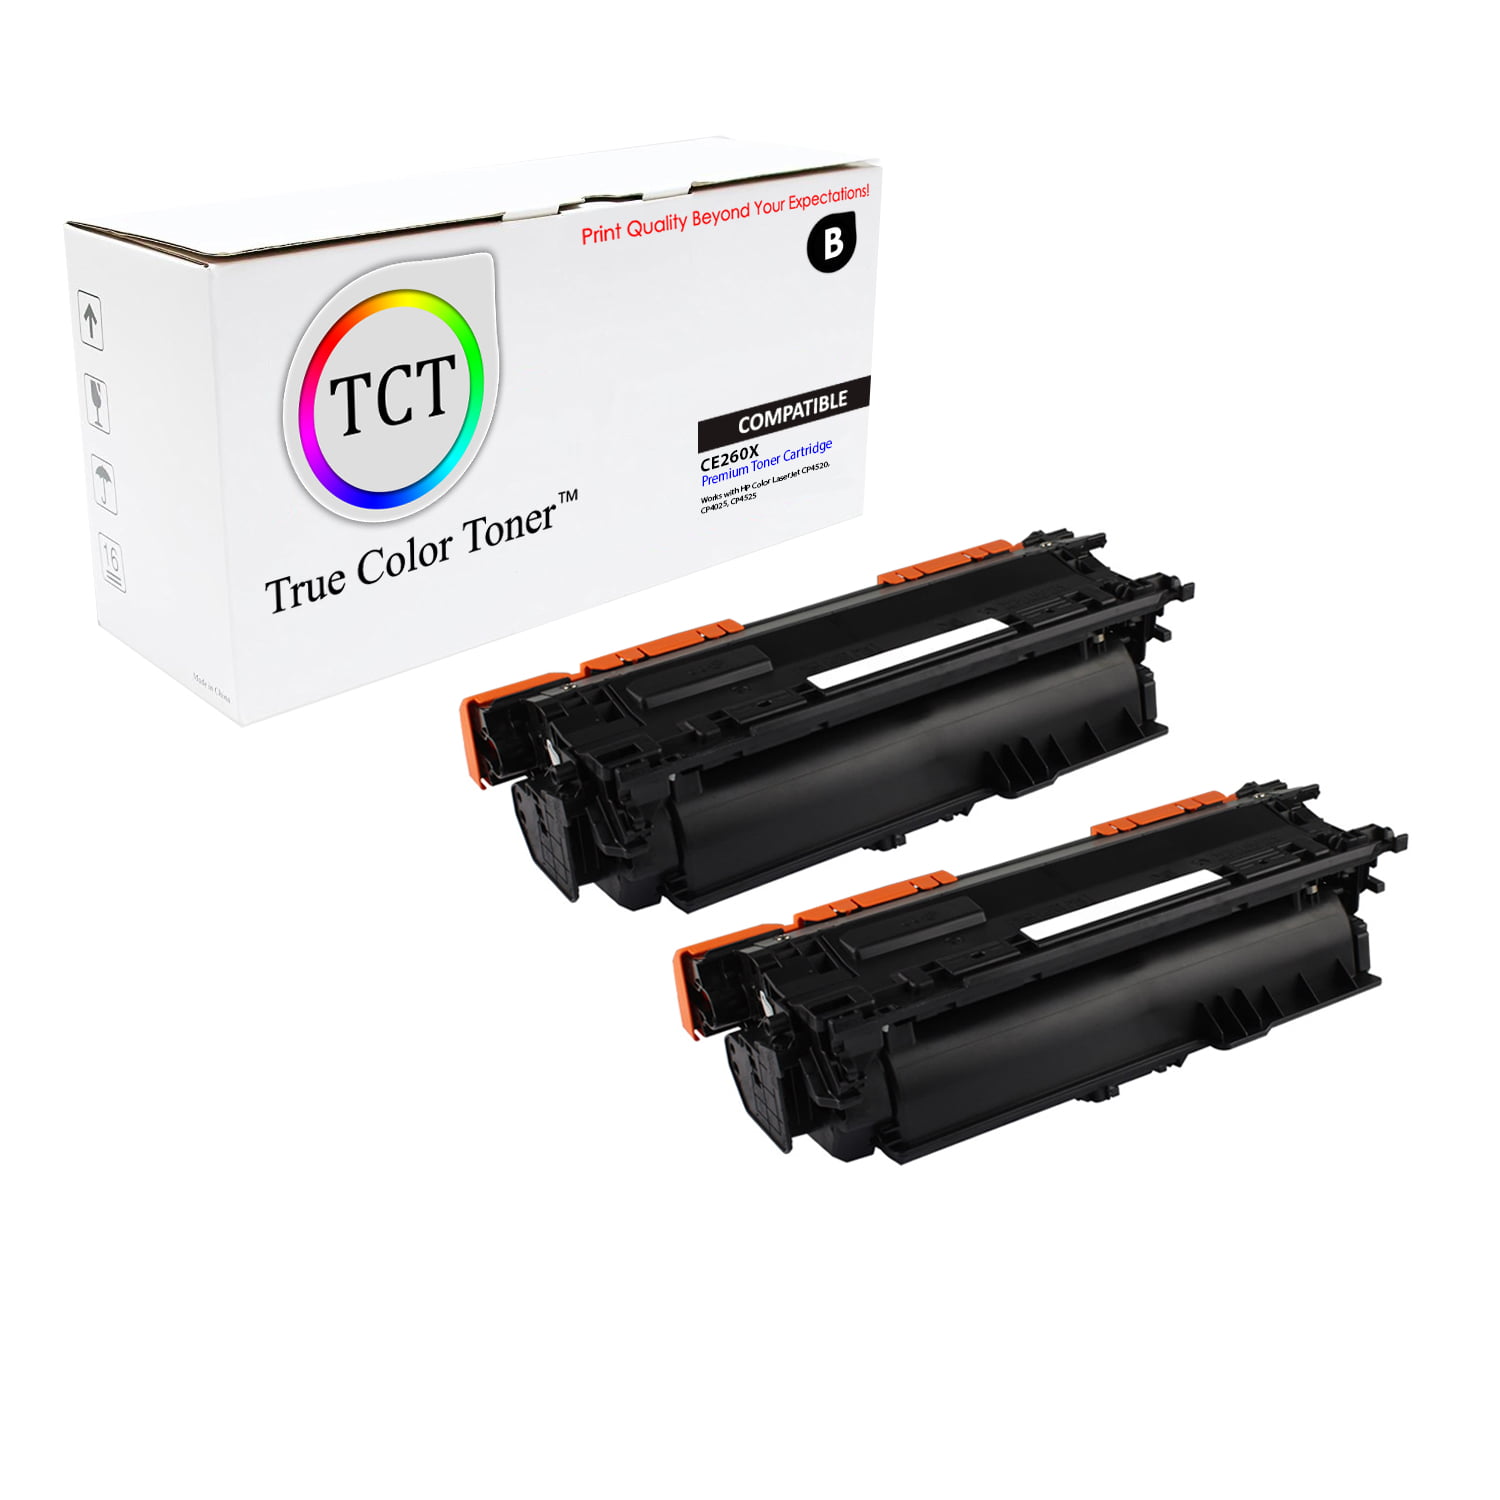 TCT Premium Compatible Toner Cartridge Replacement for 649X CE260X High works with HP Color LaserJet CP4520 CP4525 (17,000 Pages) - 2 Pack - Walmart.com